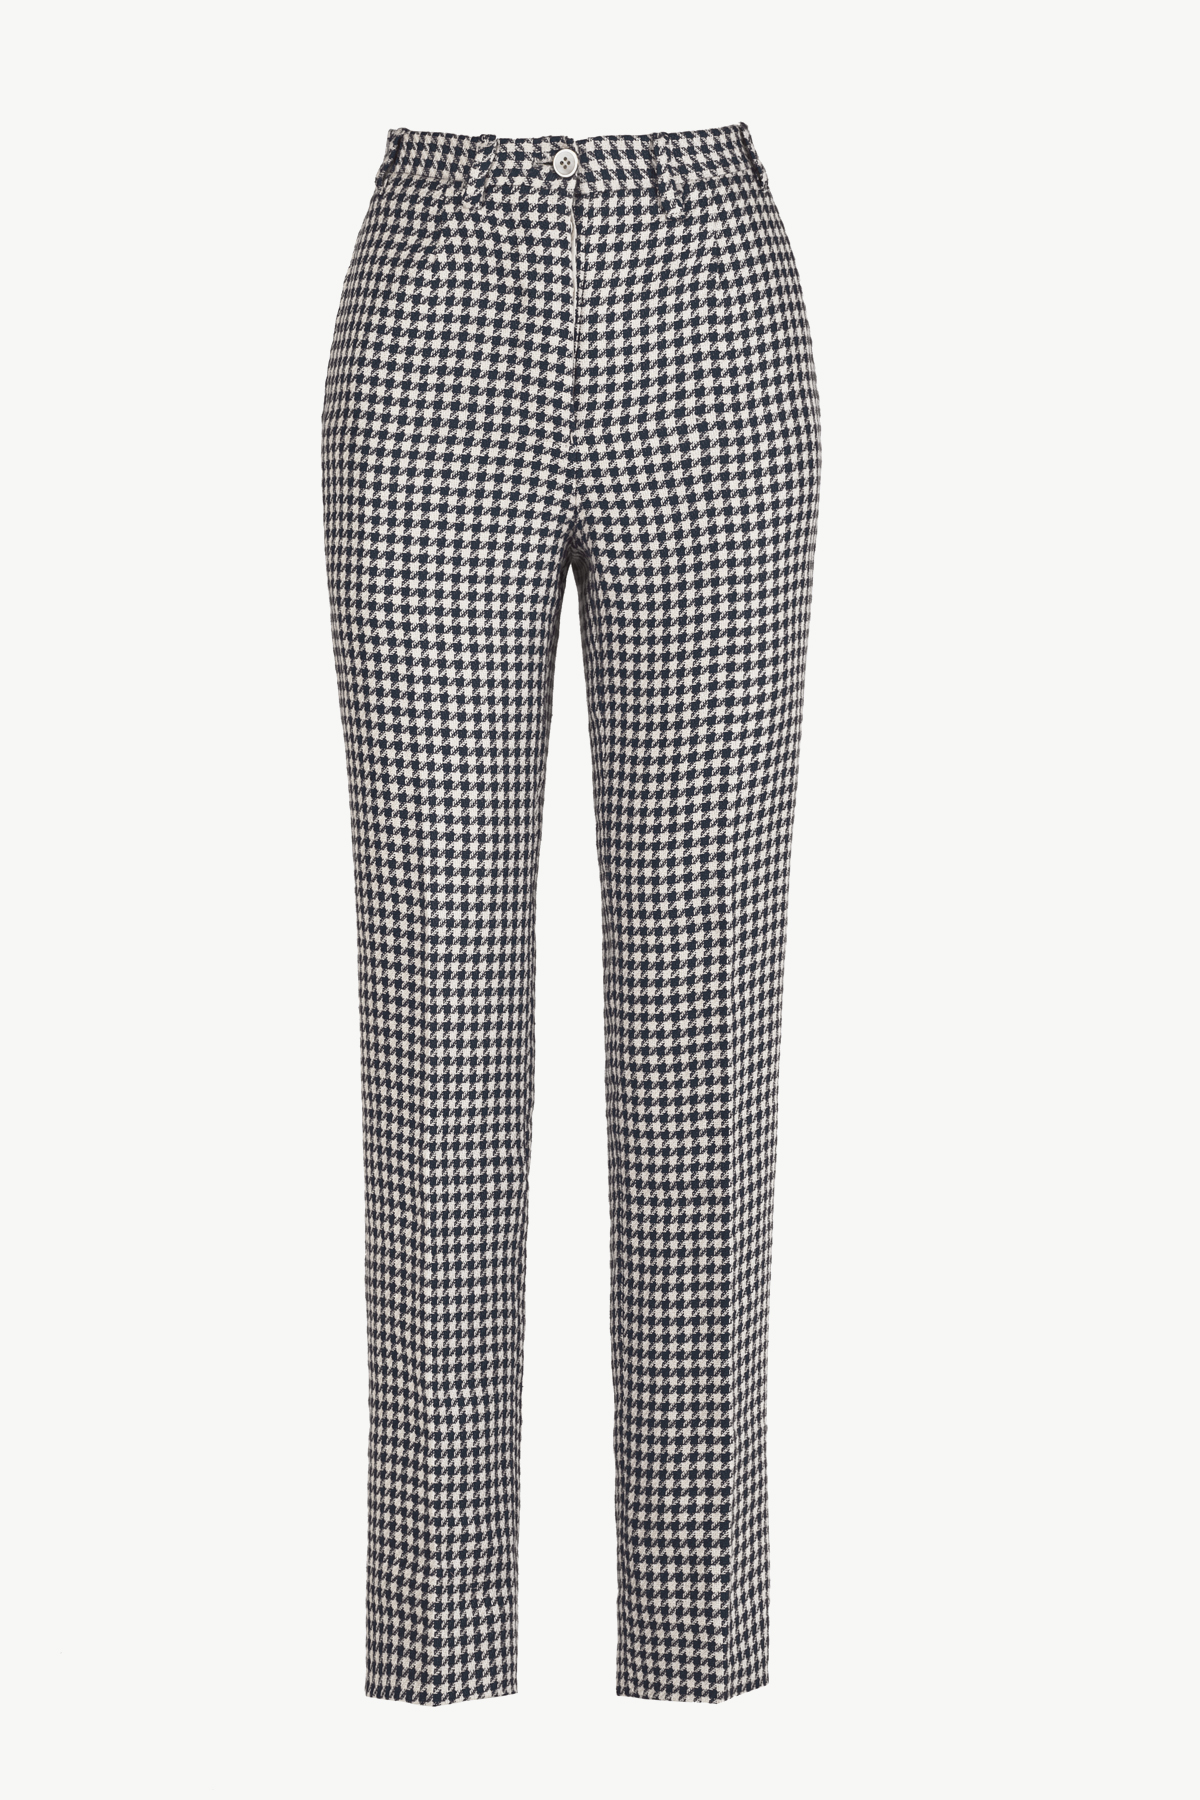 timer Machu Picchu alias Altea Trousers in Linen Houndstooth - Giuliva Heritage